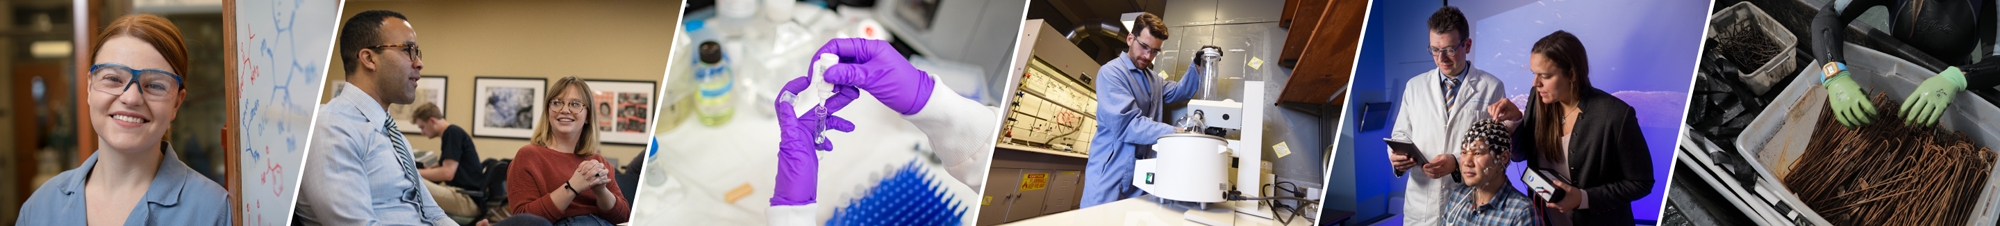 Multiple images of researchers working in the field. The first image a researcher in goggles smiling at the camera. The second image a professor and student talking. The third image is a detailed photo of two hands, in purple gloves, deal with lab equipment. The fourth image shows a researcher in the lab. The fifth image shows two researchers putting a web of sensors on a subjects head. The sixth image is a detailed photo of two gloves hands in a bin of rusted equipment used in marine research.